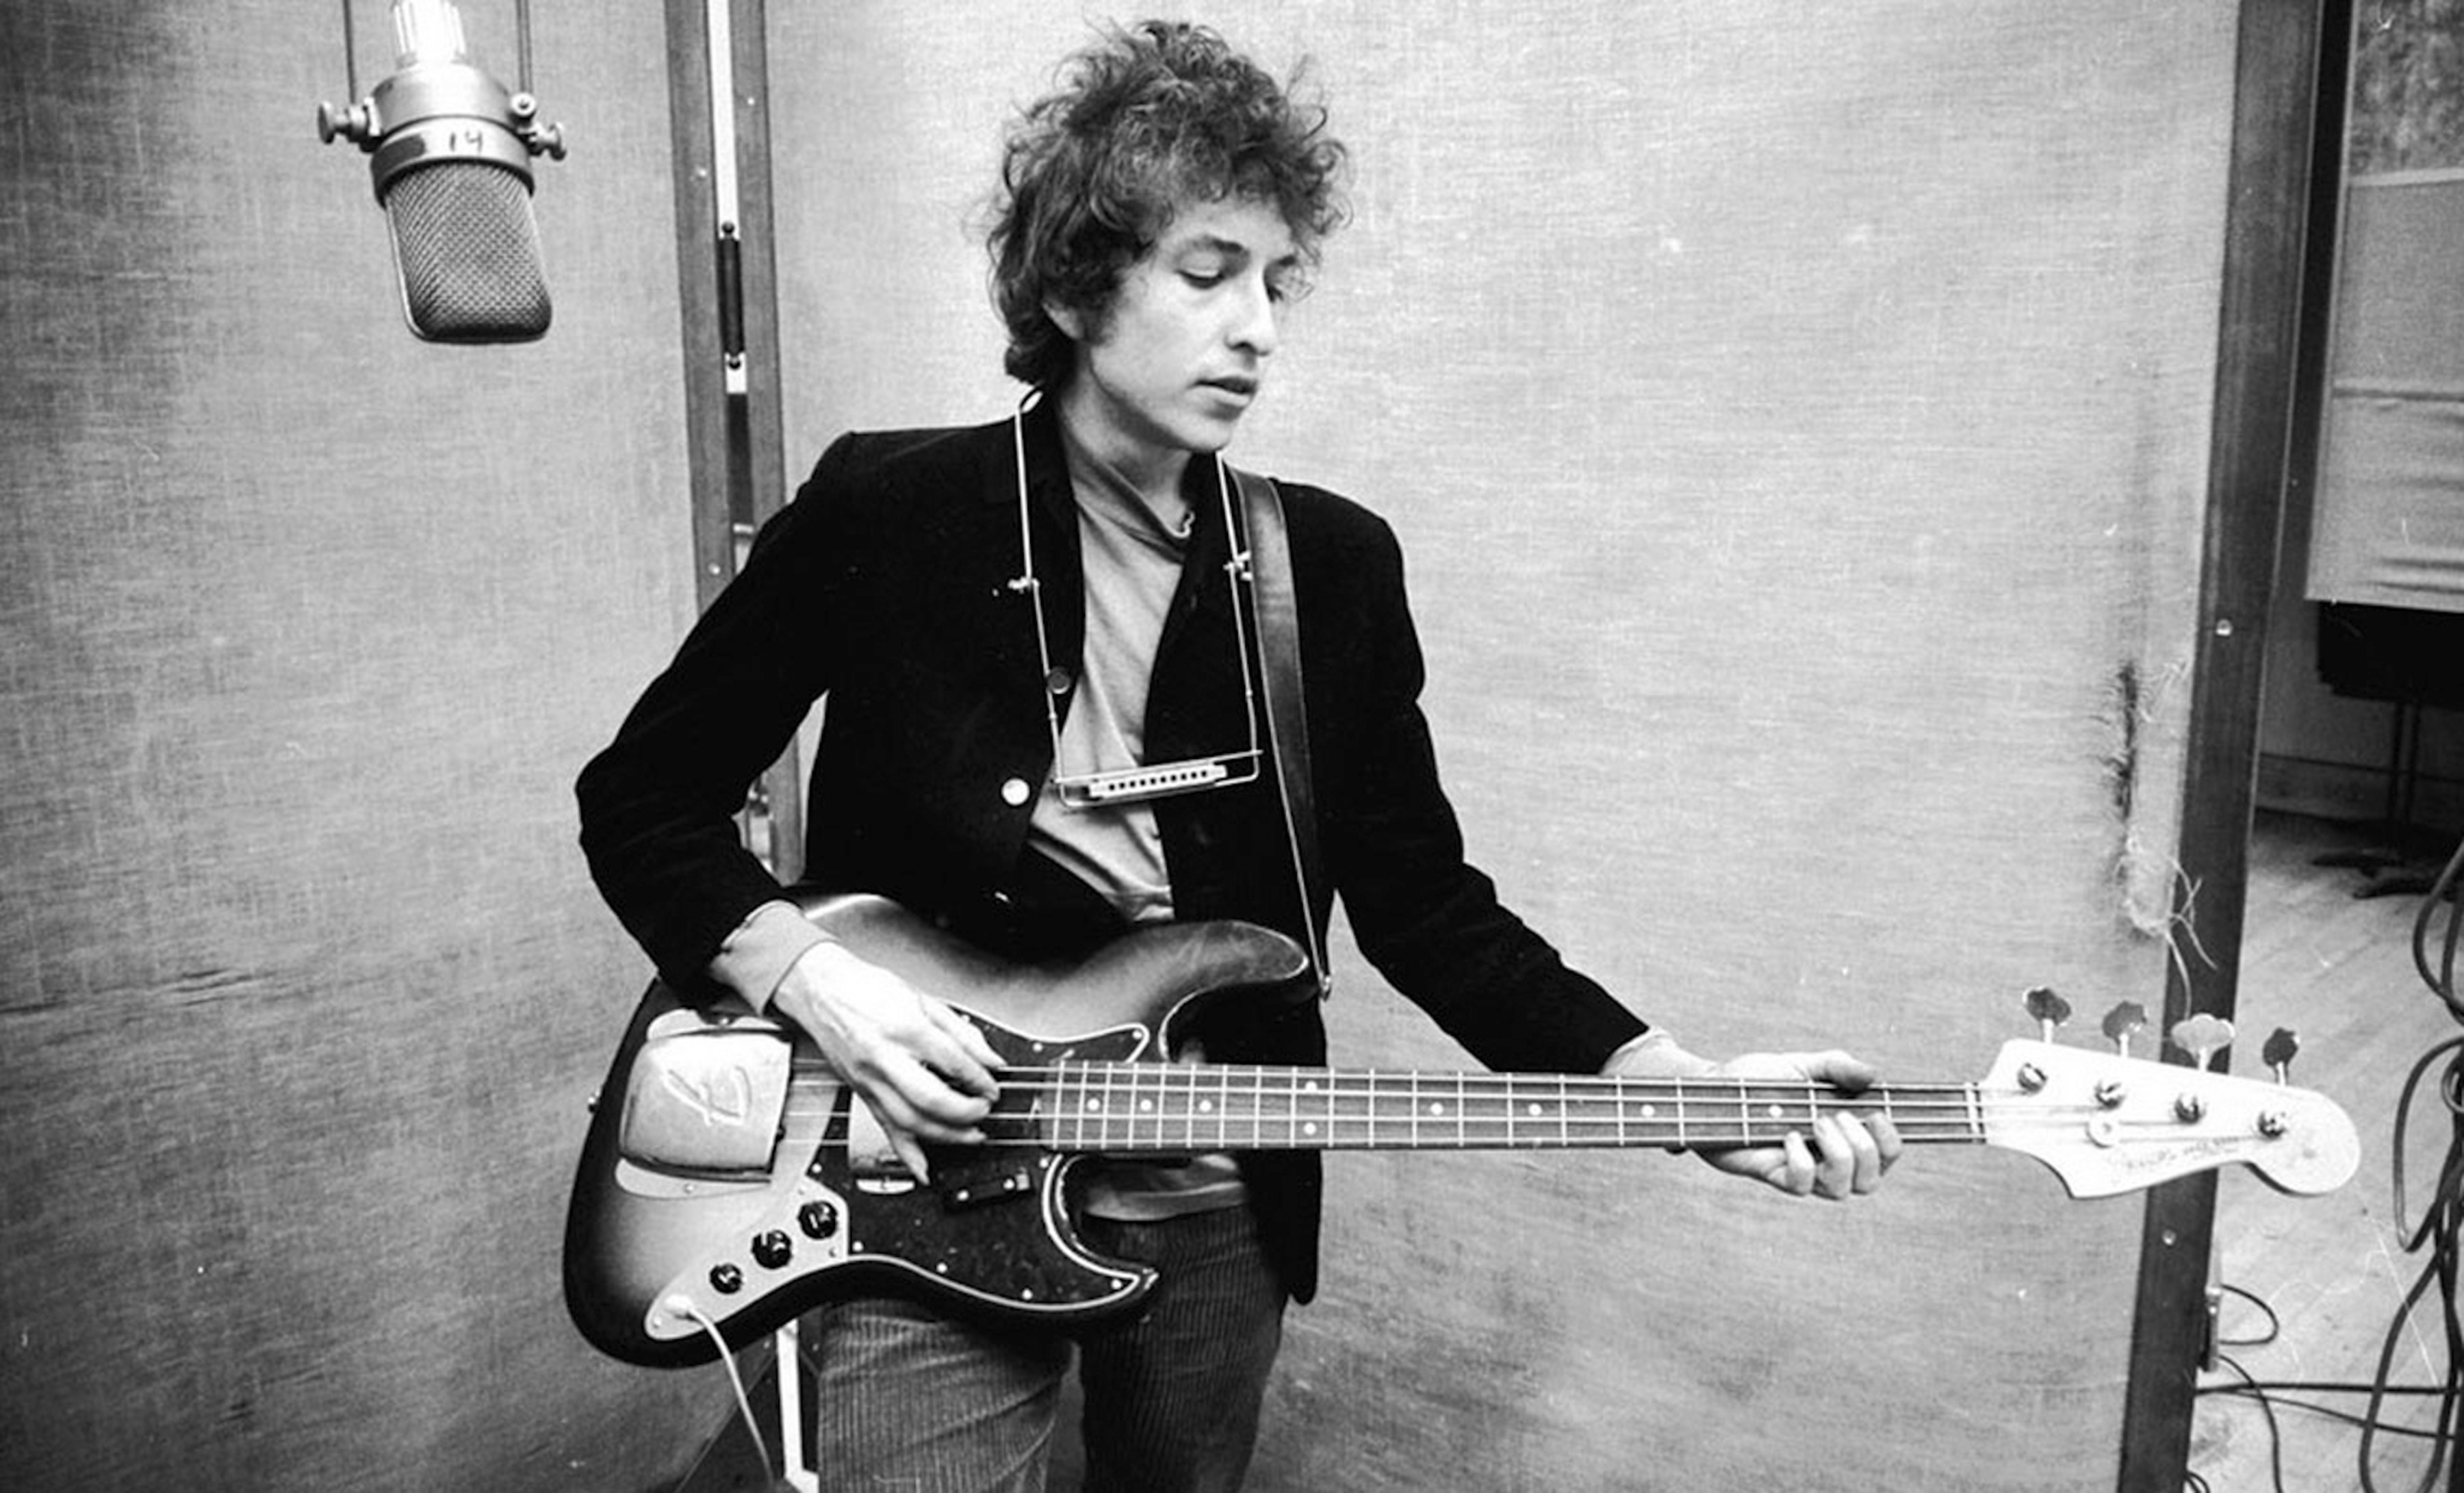 American singer-songwriter Bob Dylan is set to play the Hong Kong Convention and Exhibition Centre this summer on August 4.